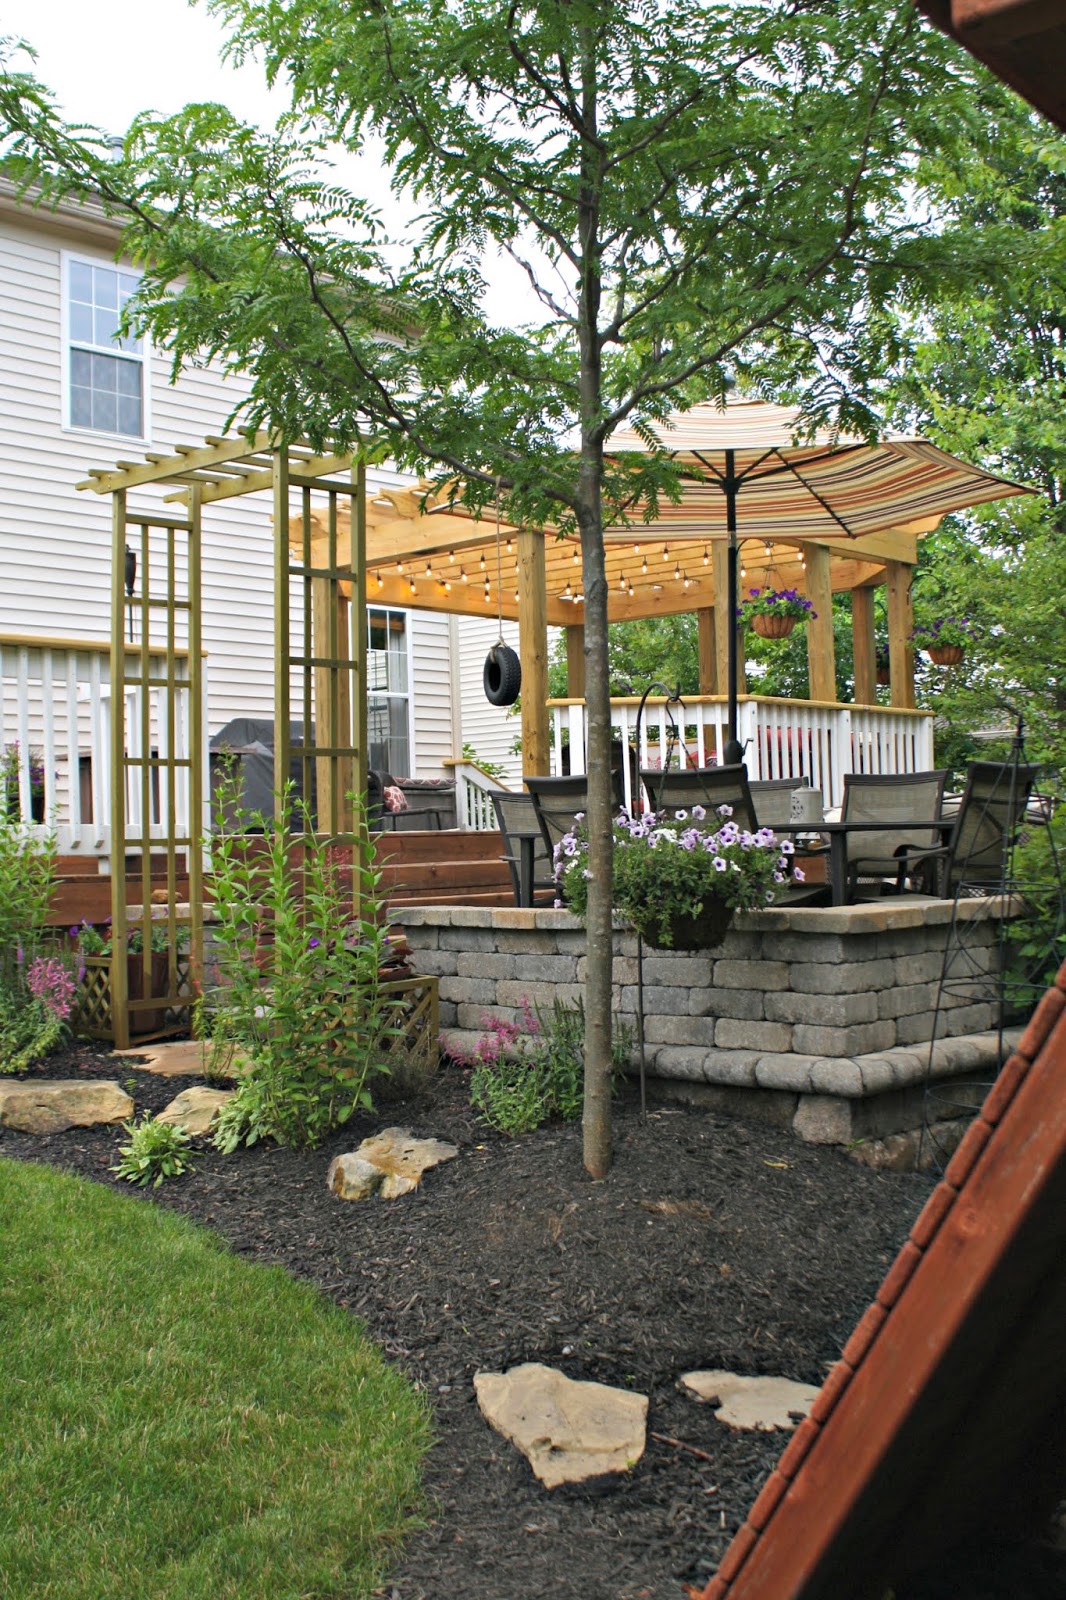 Pergola, deck and paver patio with landscaping